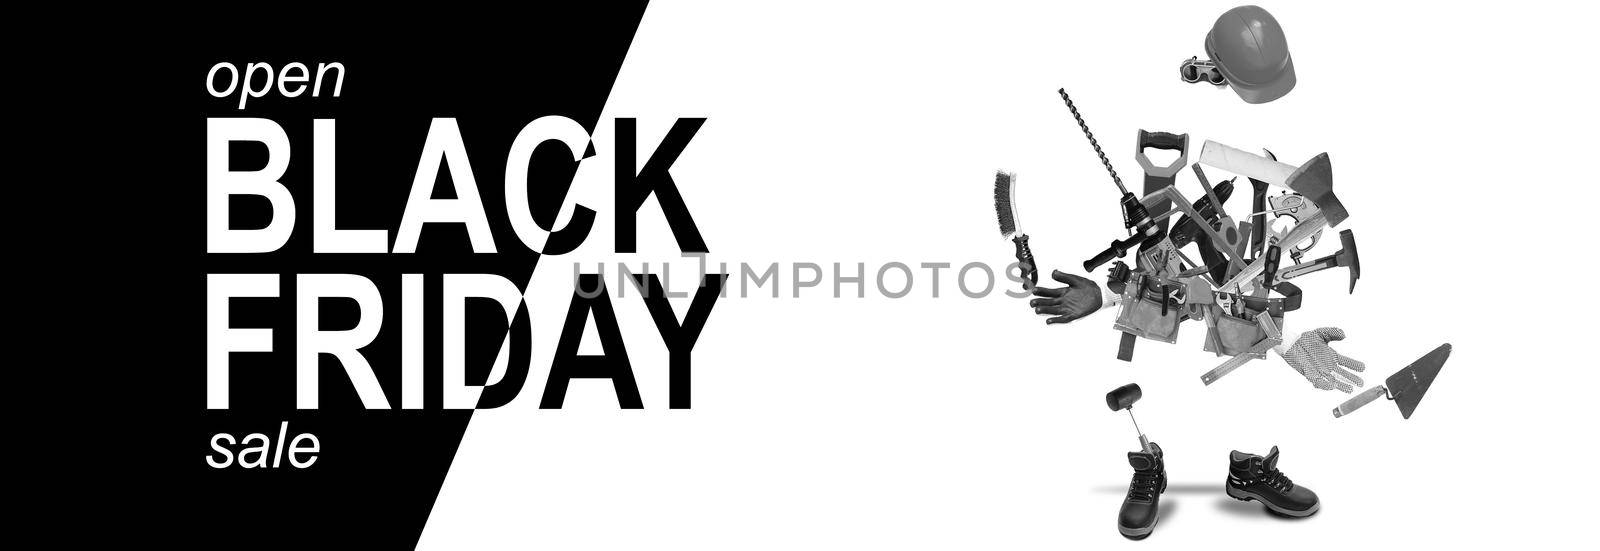 Black Friday in tool shop. Many tolls on black and white background text black friday by Andelov13